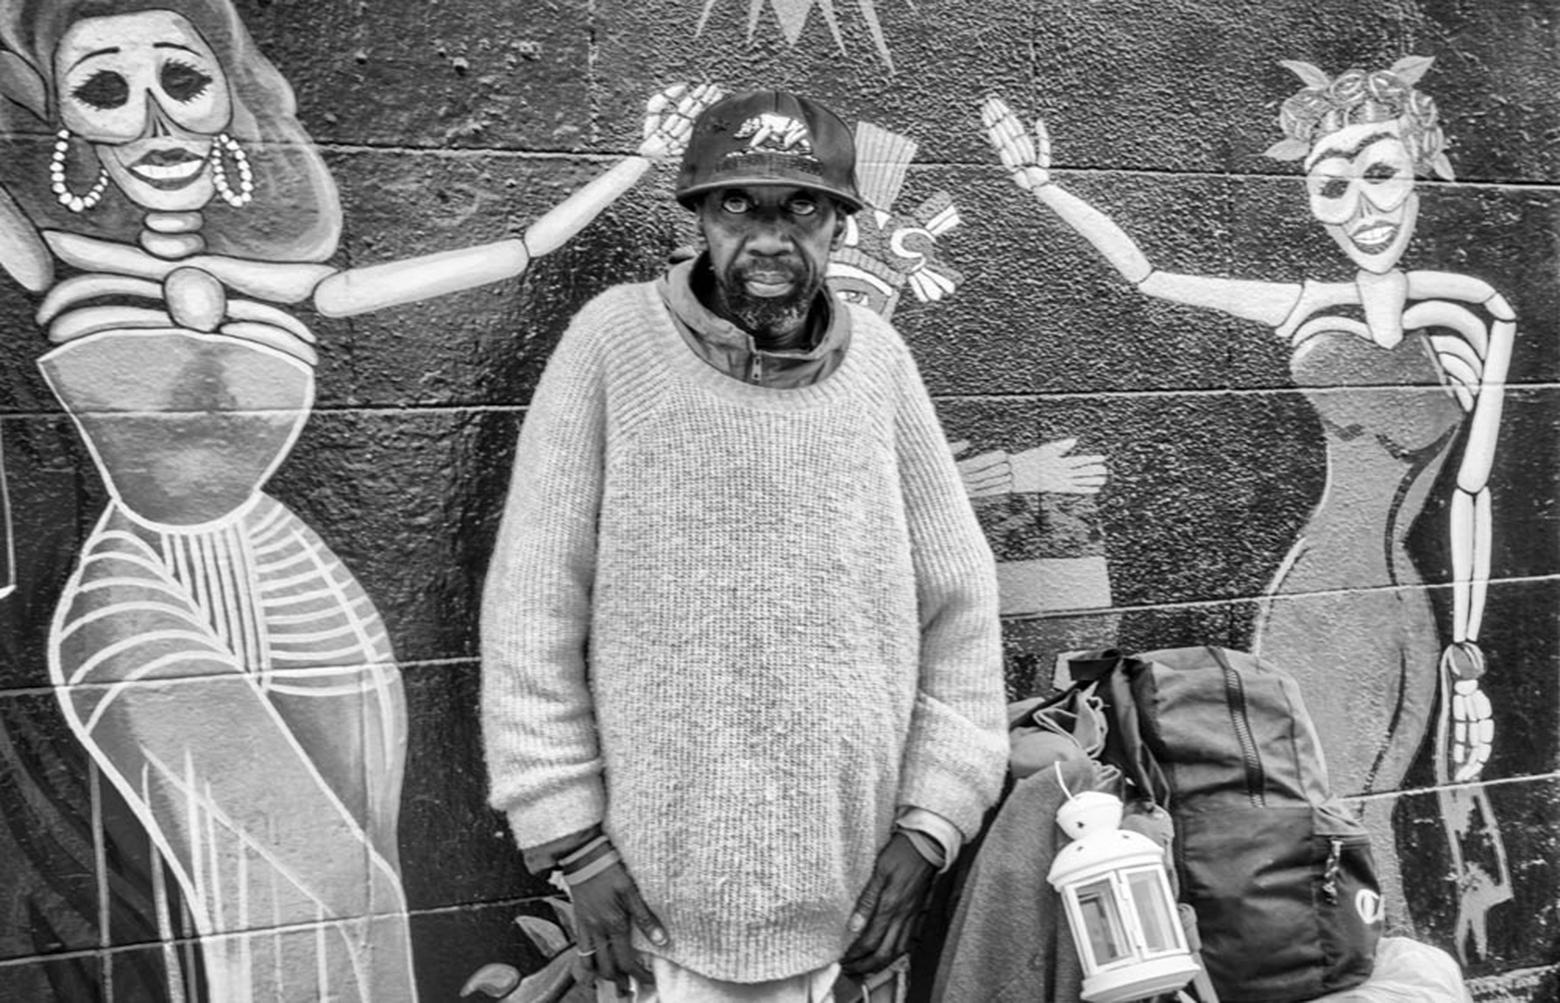 Abraham stands in front of a wall with a large mural of two masked party-going women. He is looking into the camera and is wearing a sweater and cap.